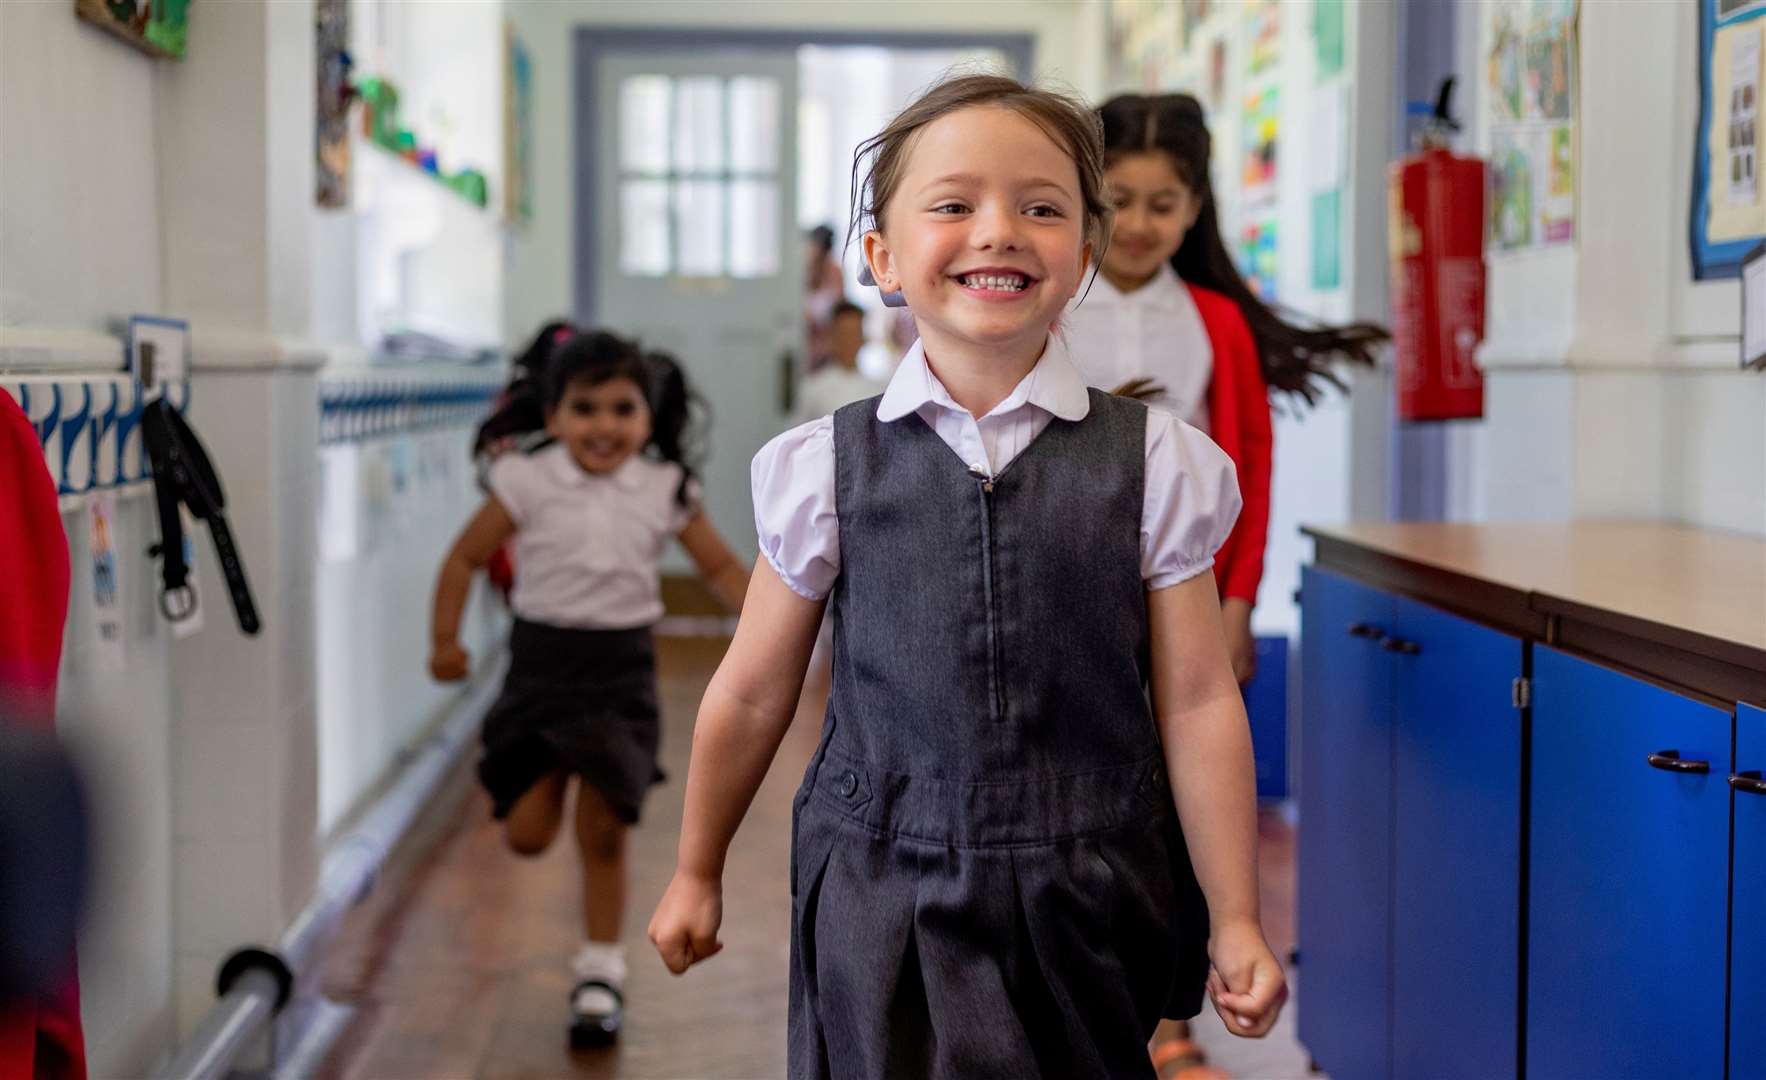 Children starting school in September will know today which school they’ve been allocated. Image: iStock